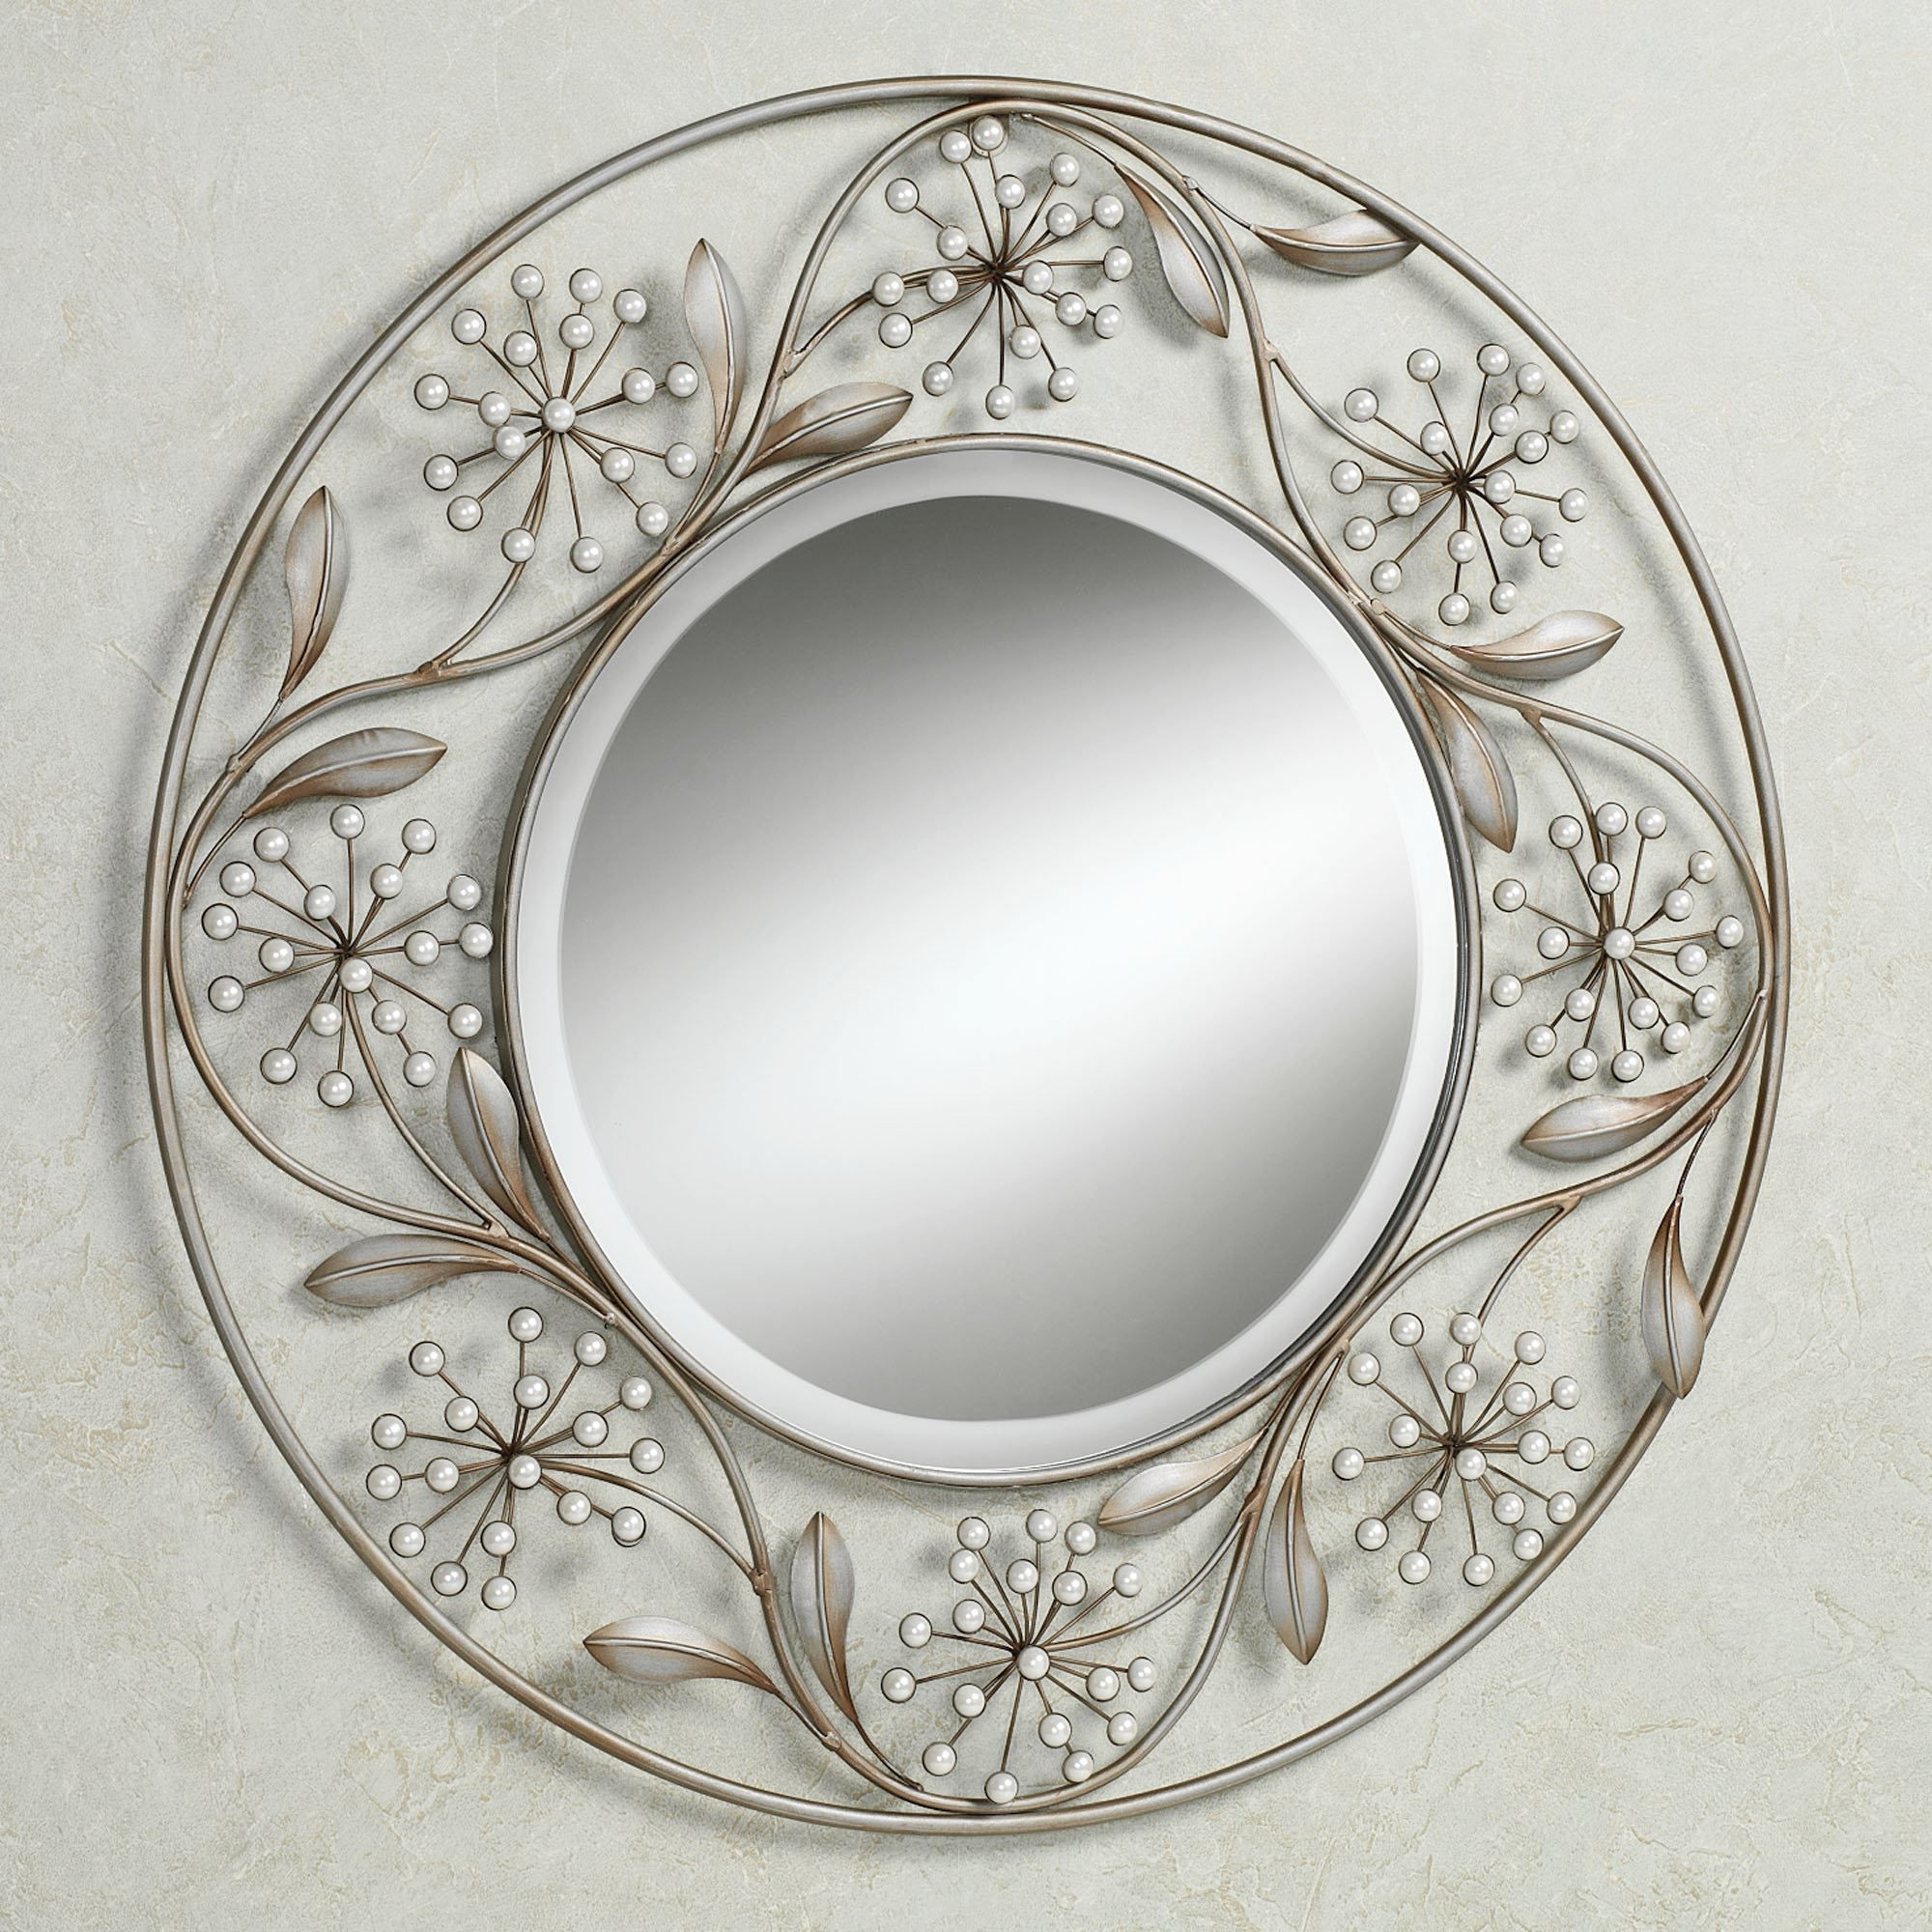 Pearlette Round Metal Wall Mirror Inside Woven Metal Round Wall Mirrors (View 15 of 15)